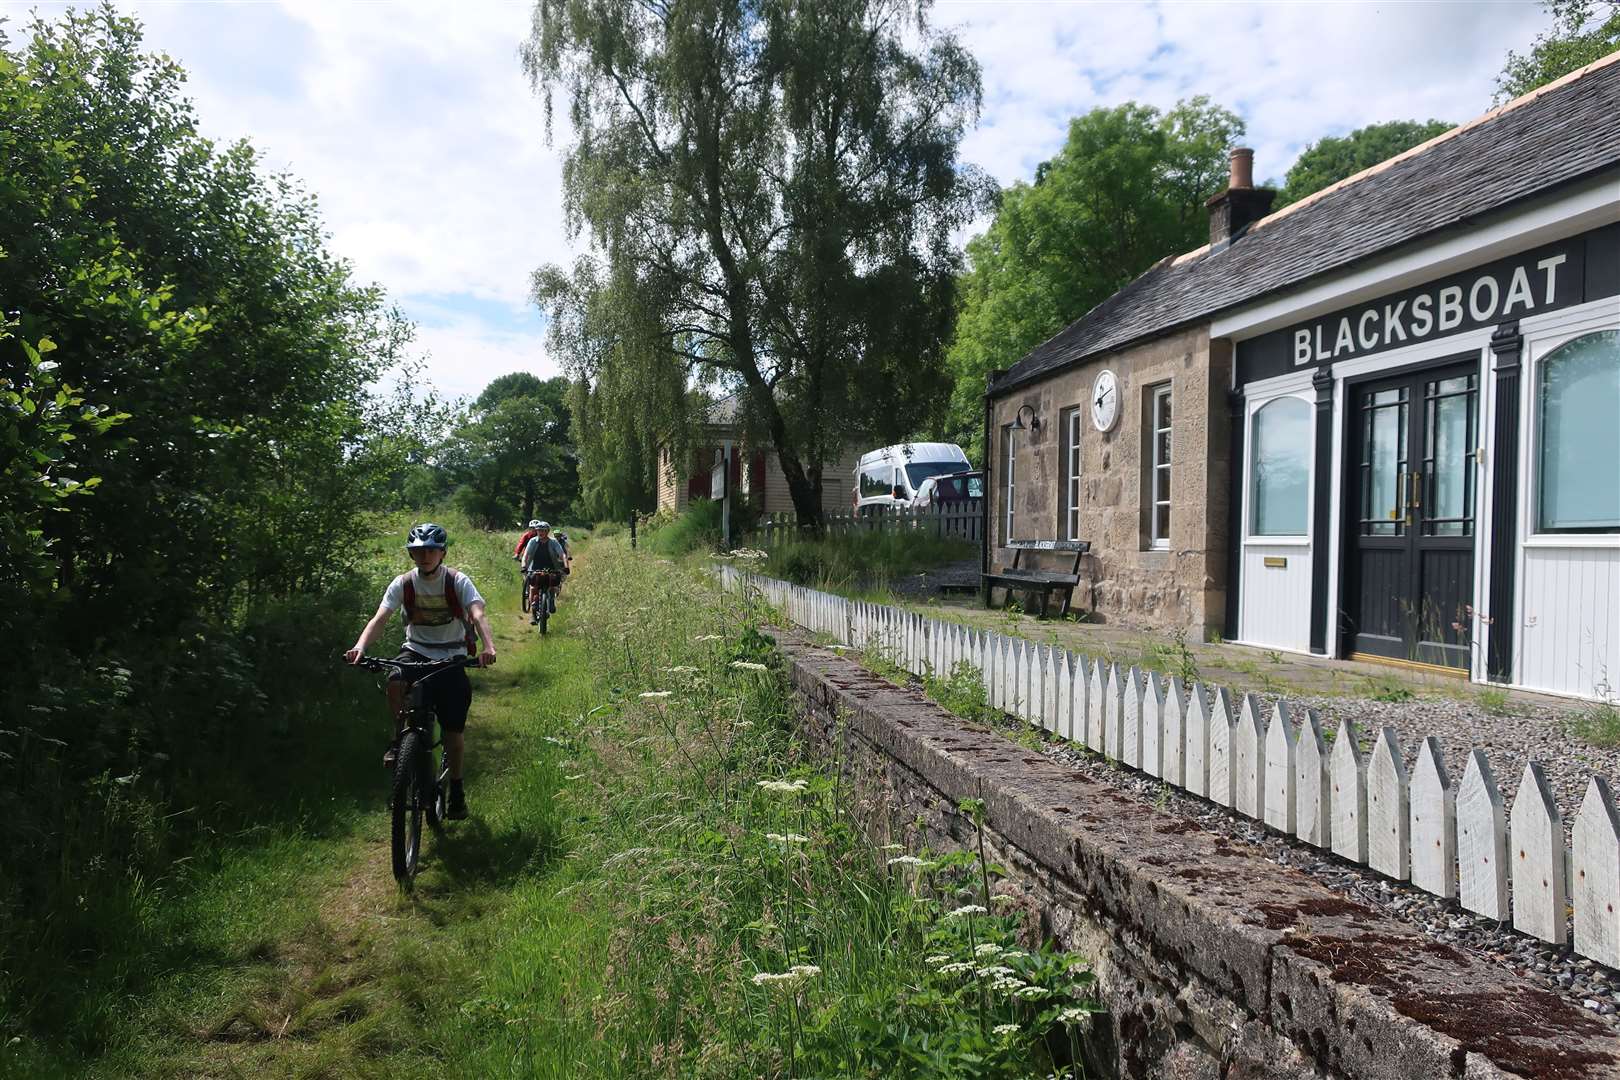 The Speyside Way passes the old station at Blacksboat.